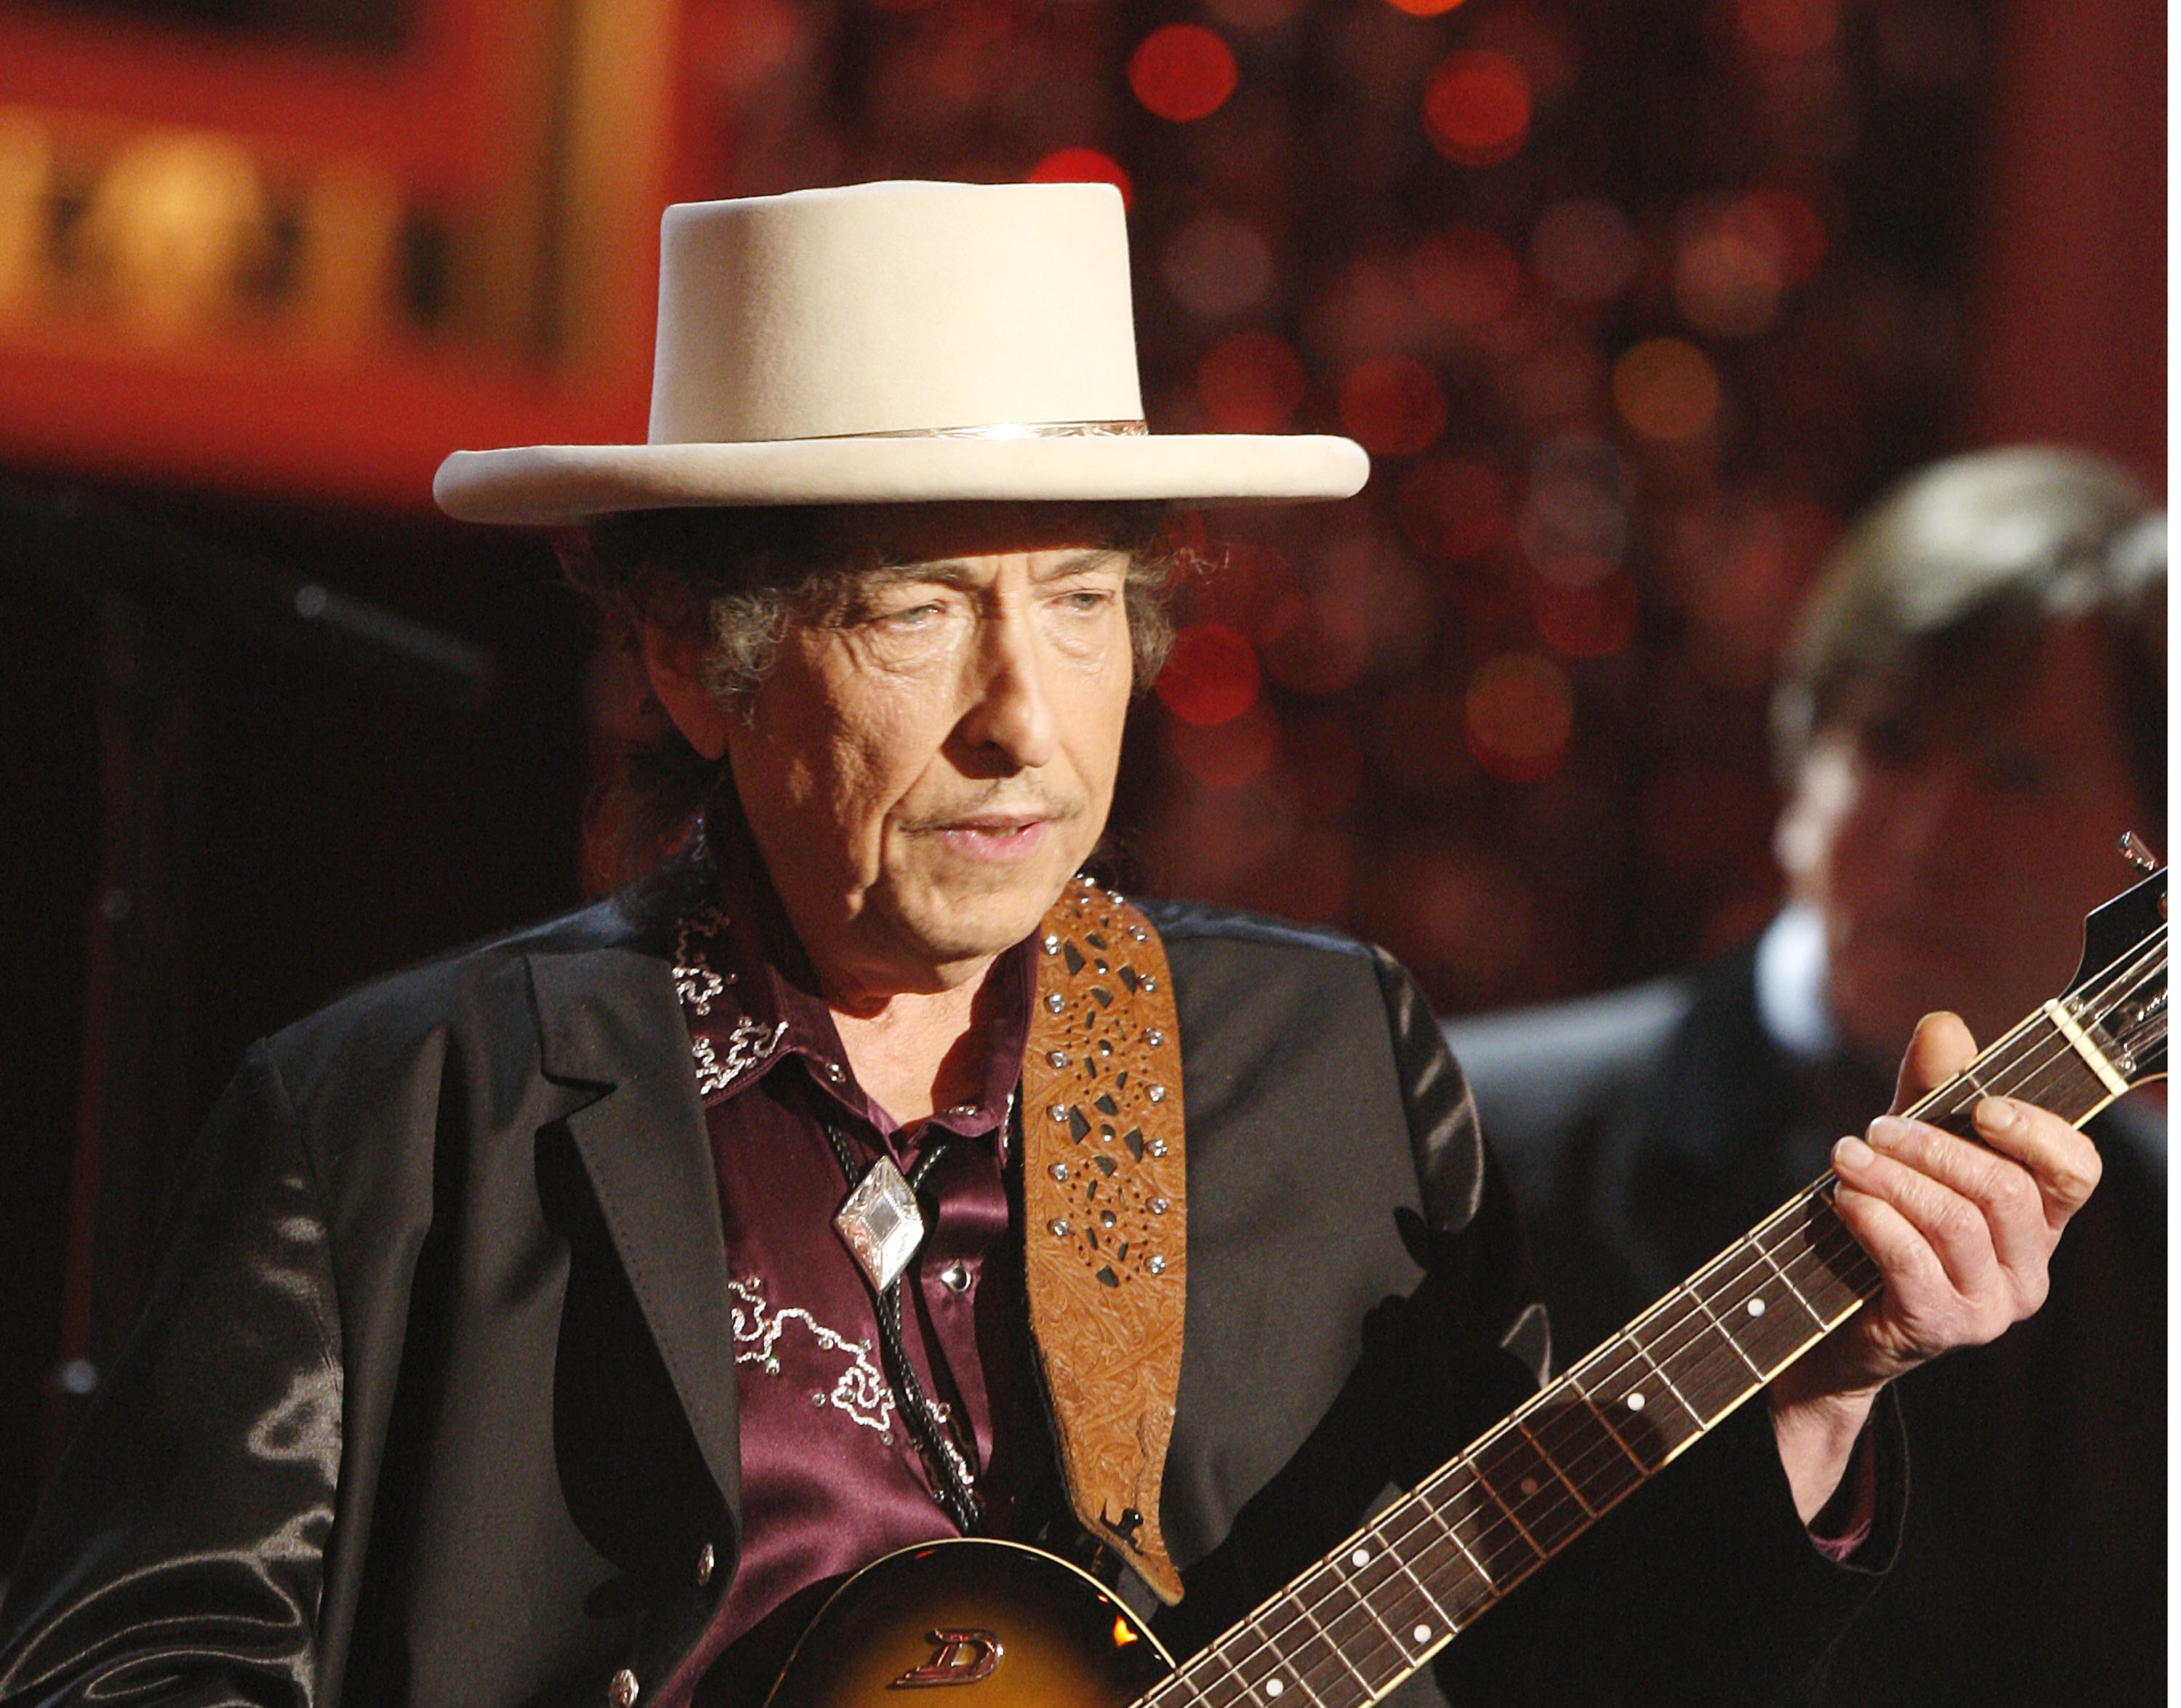 Bob Dylan wears a hat and plays guitar.